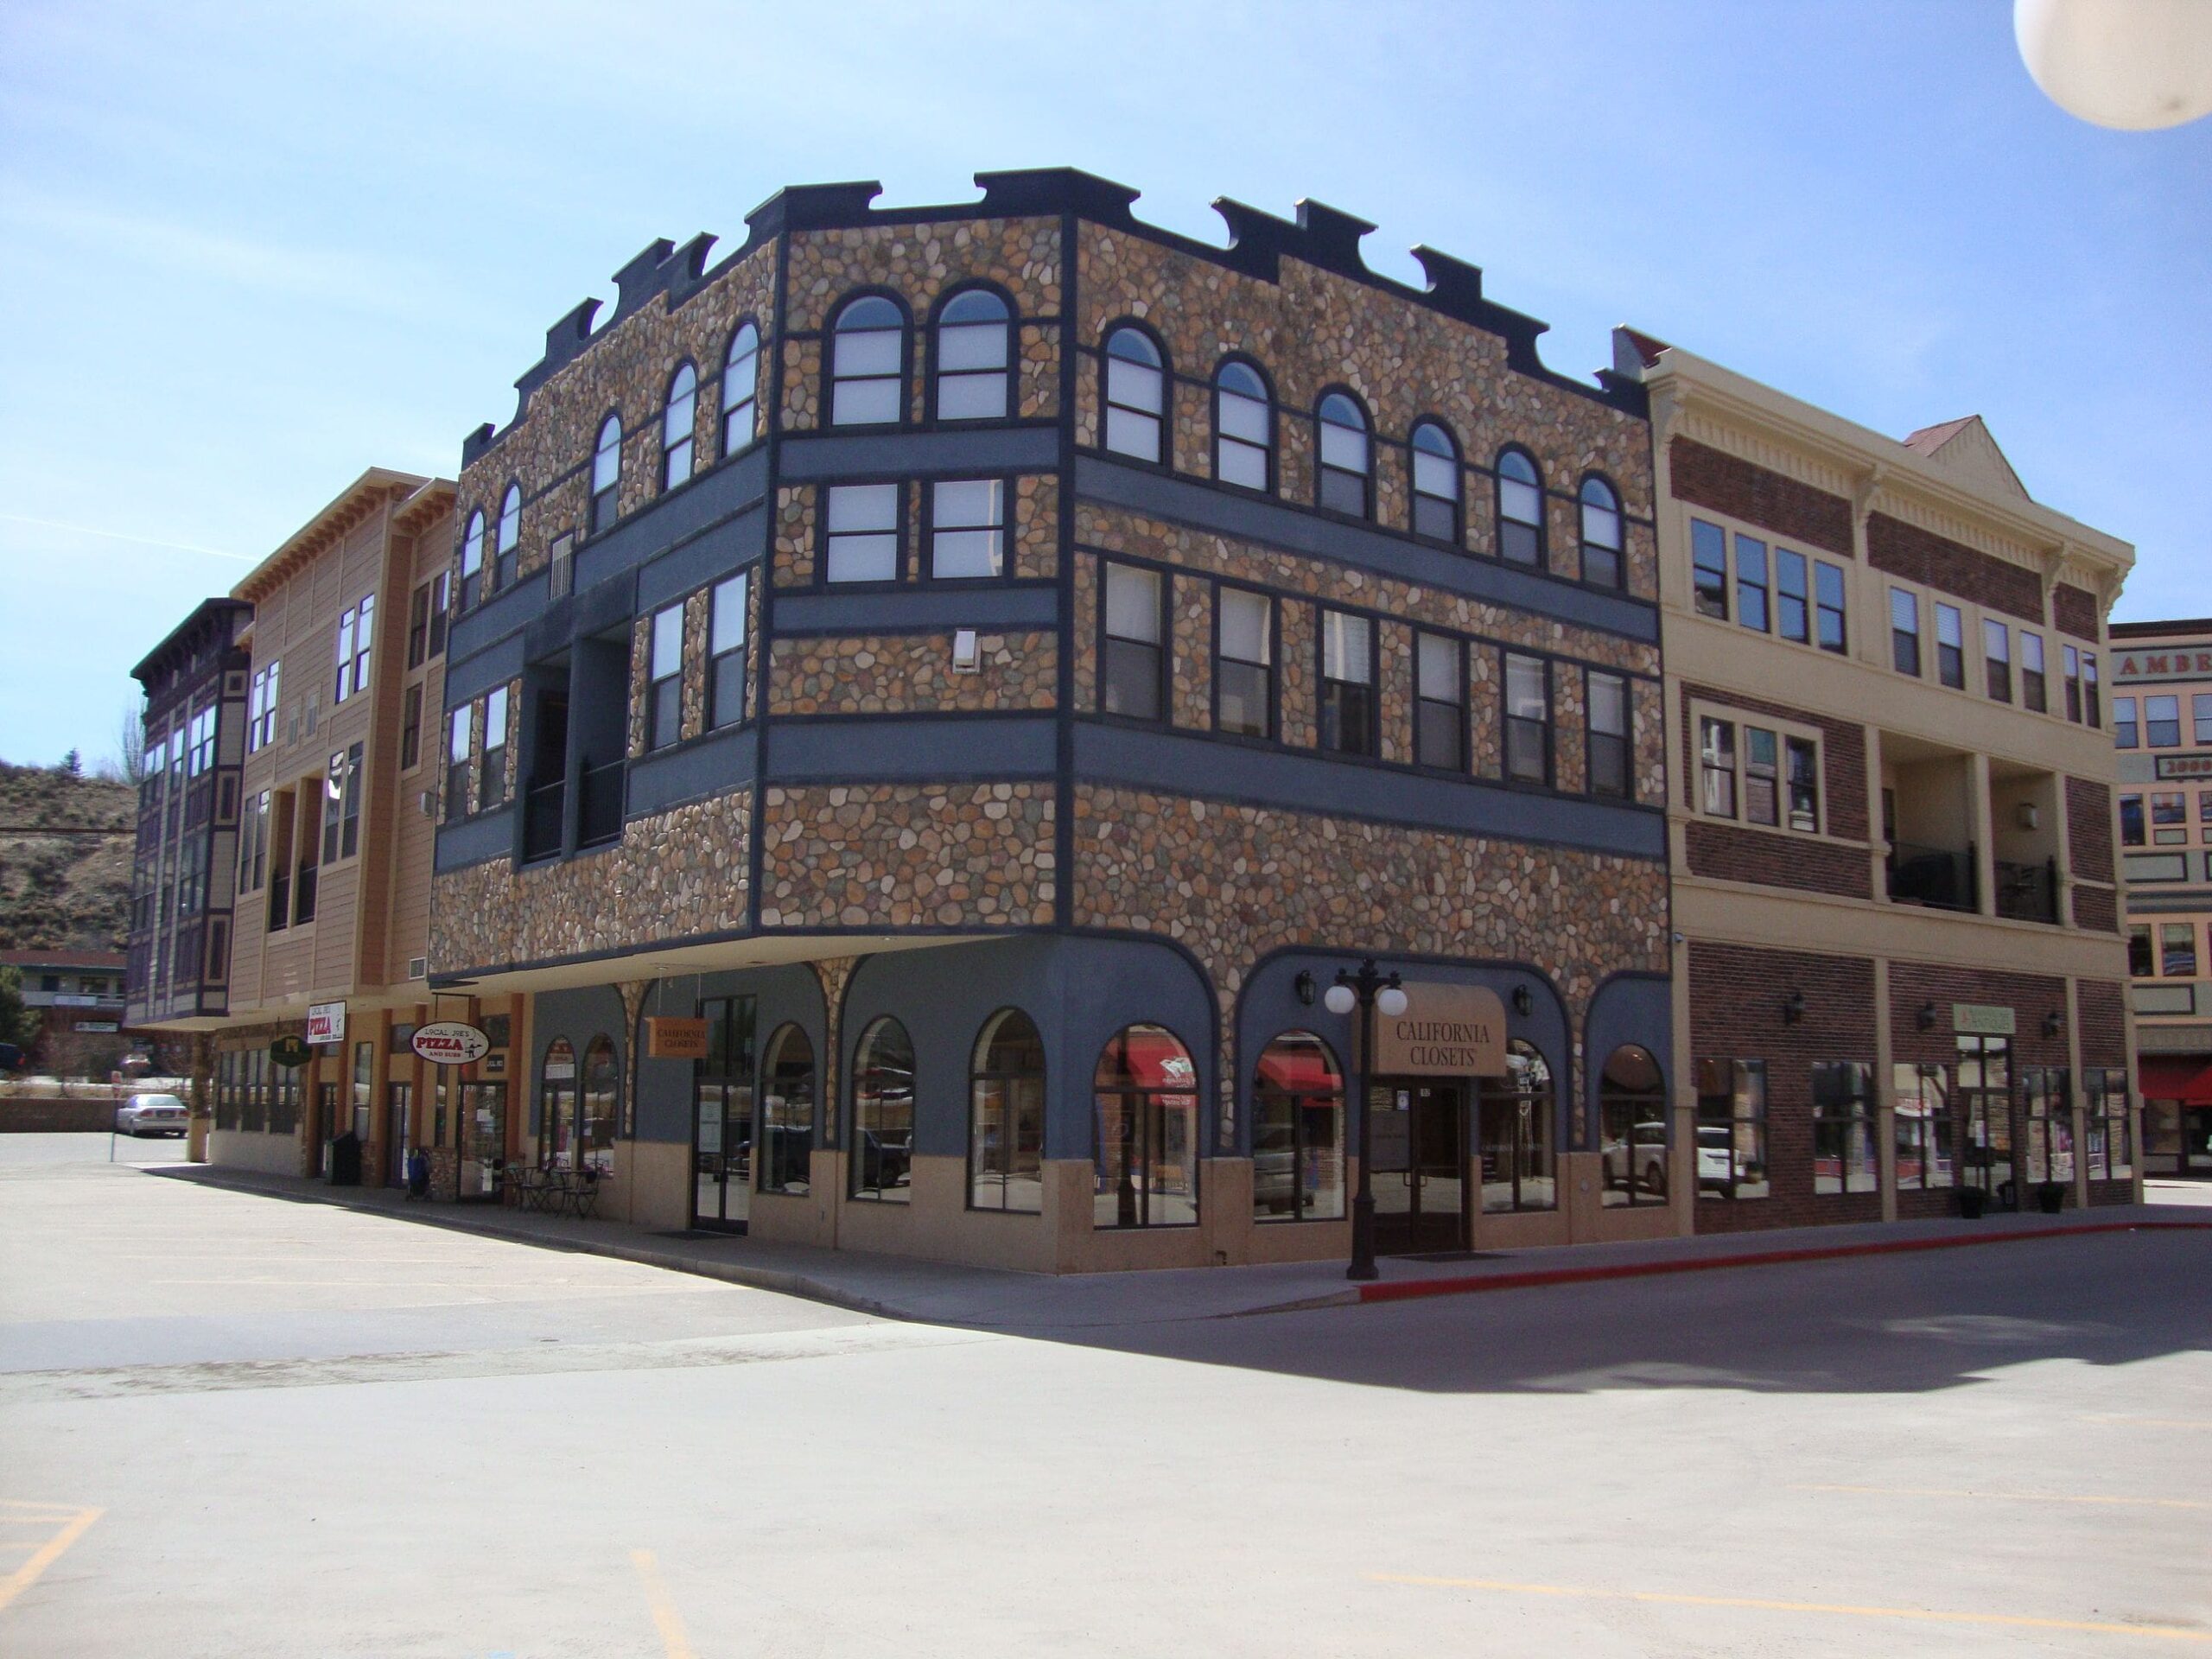 Wide angle view of the corner of the Ruby Building at Riverwalk at Edwards, Colorado.